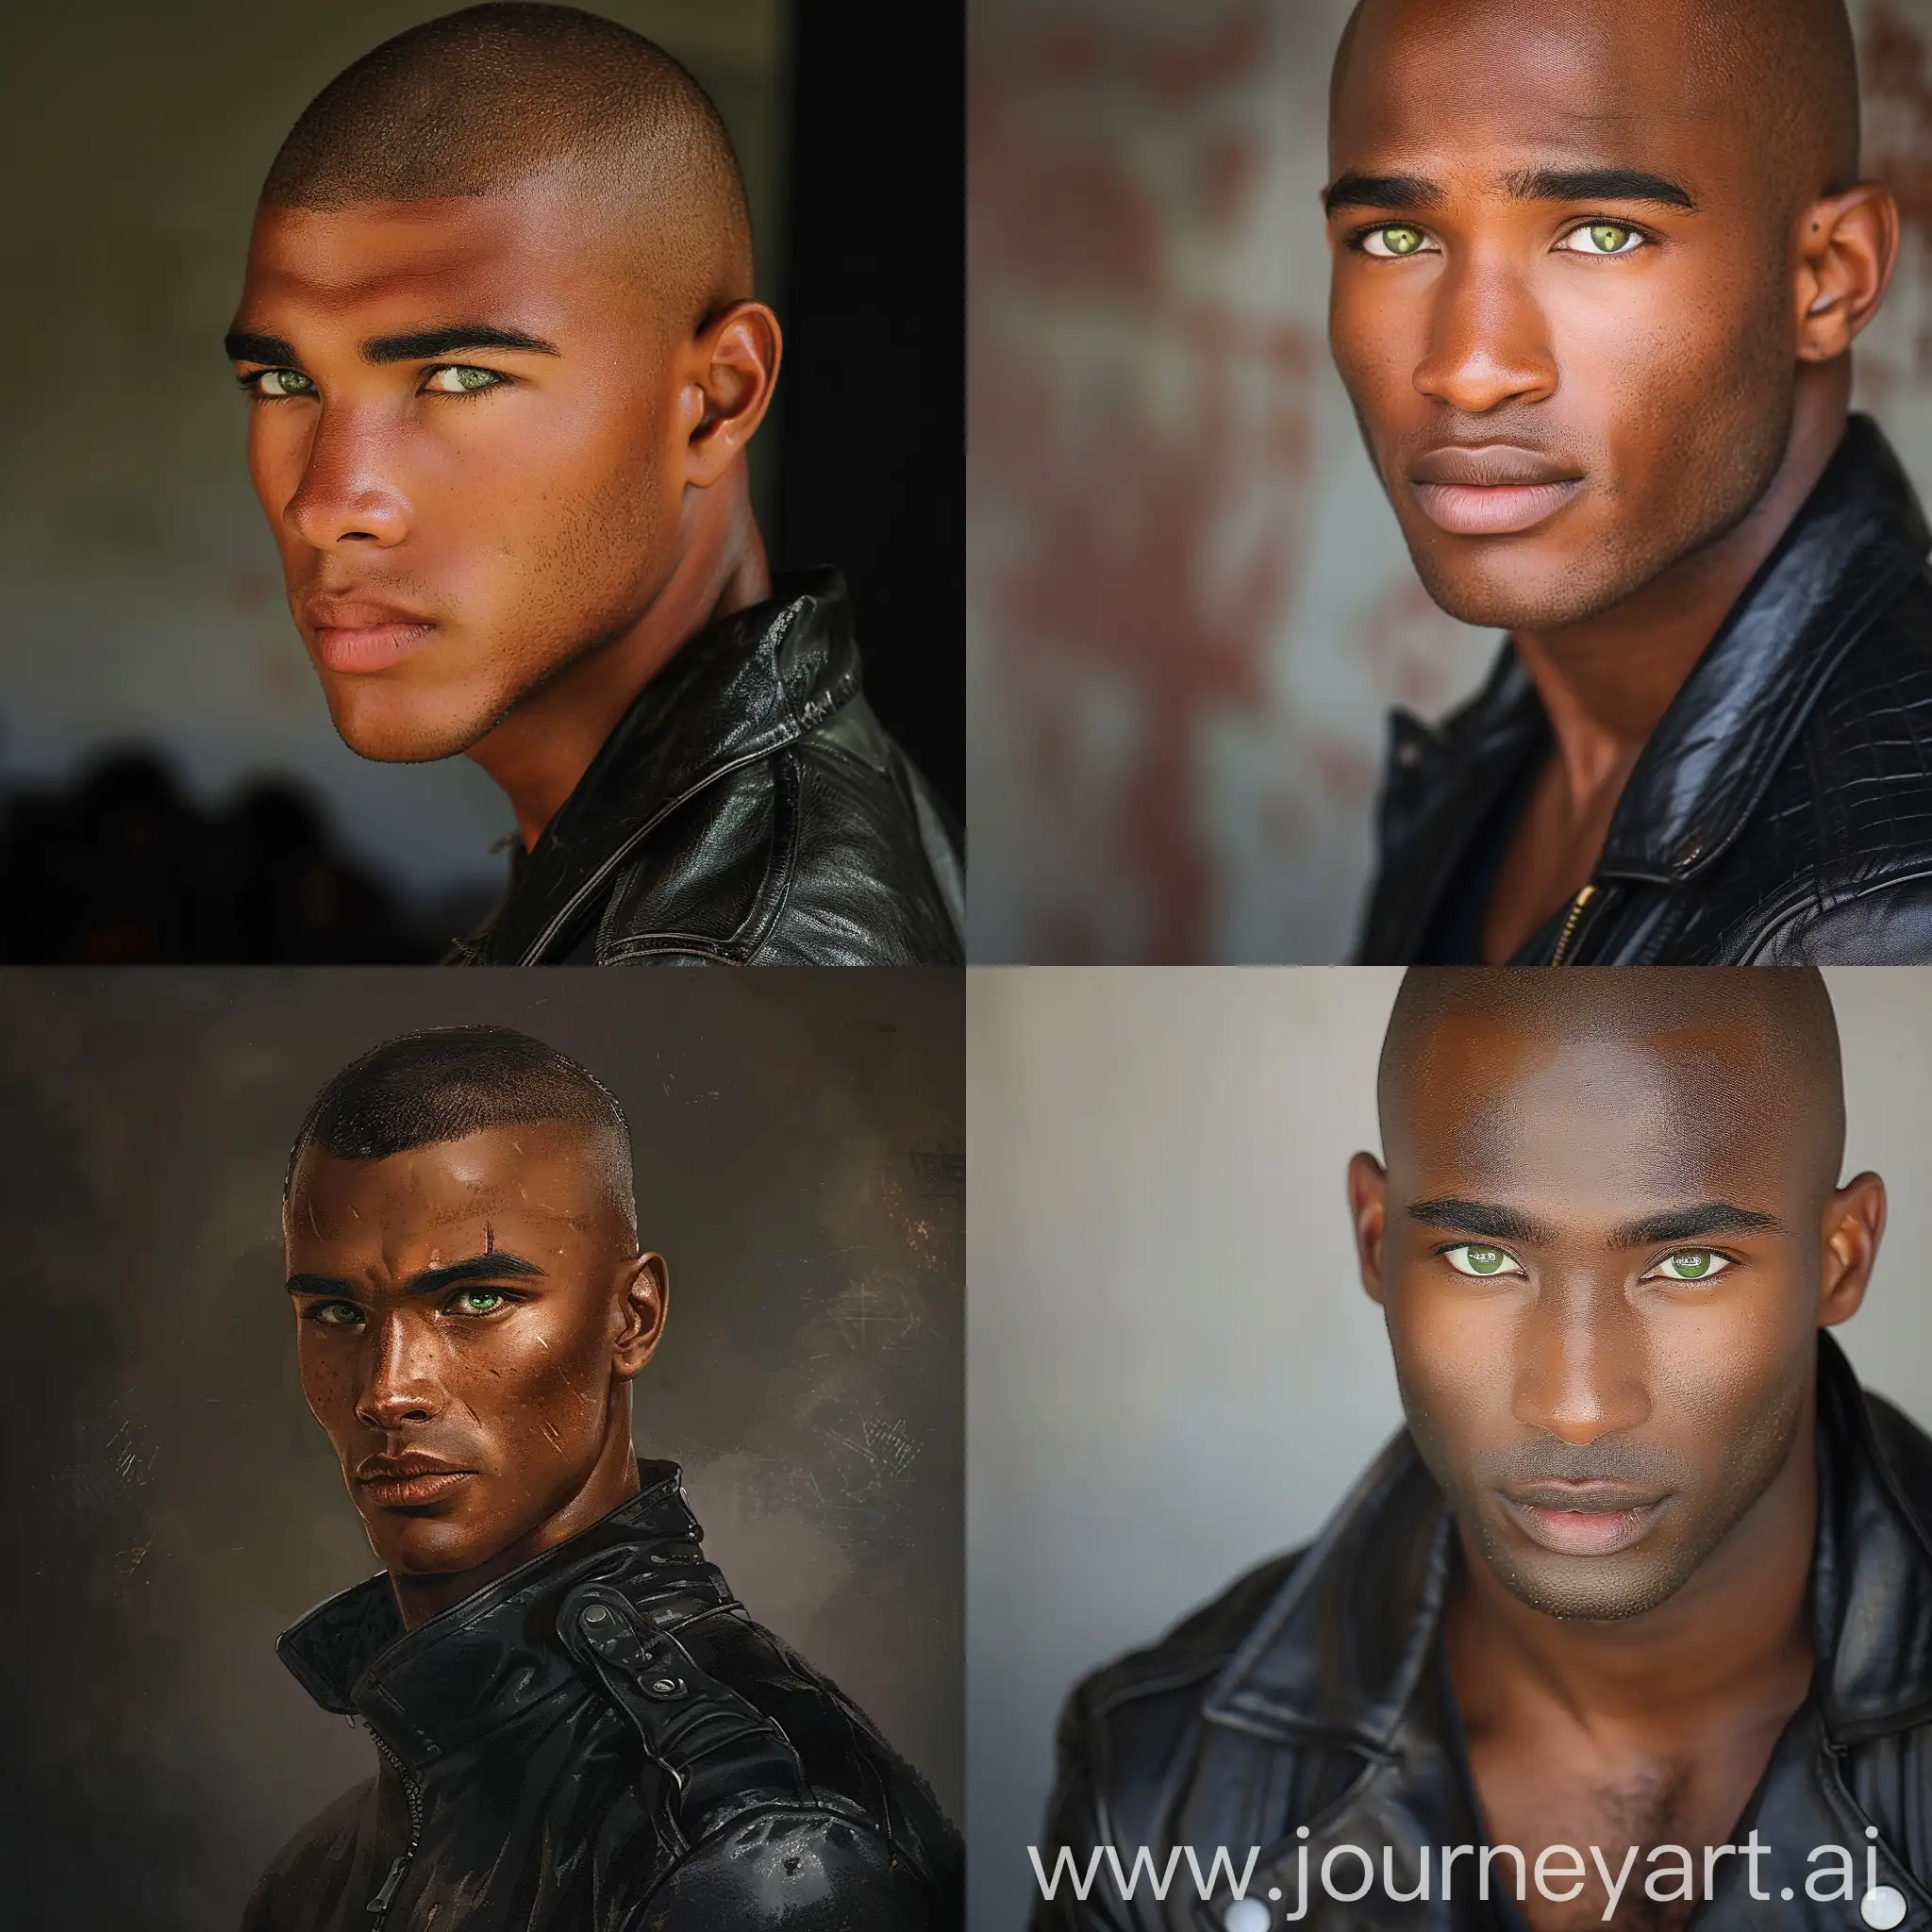 Young-Man-with-Distinctive-Features-in-Leather-Jacket